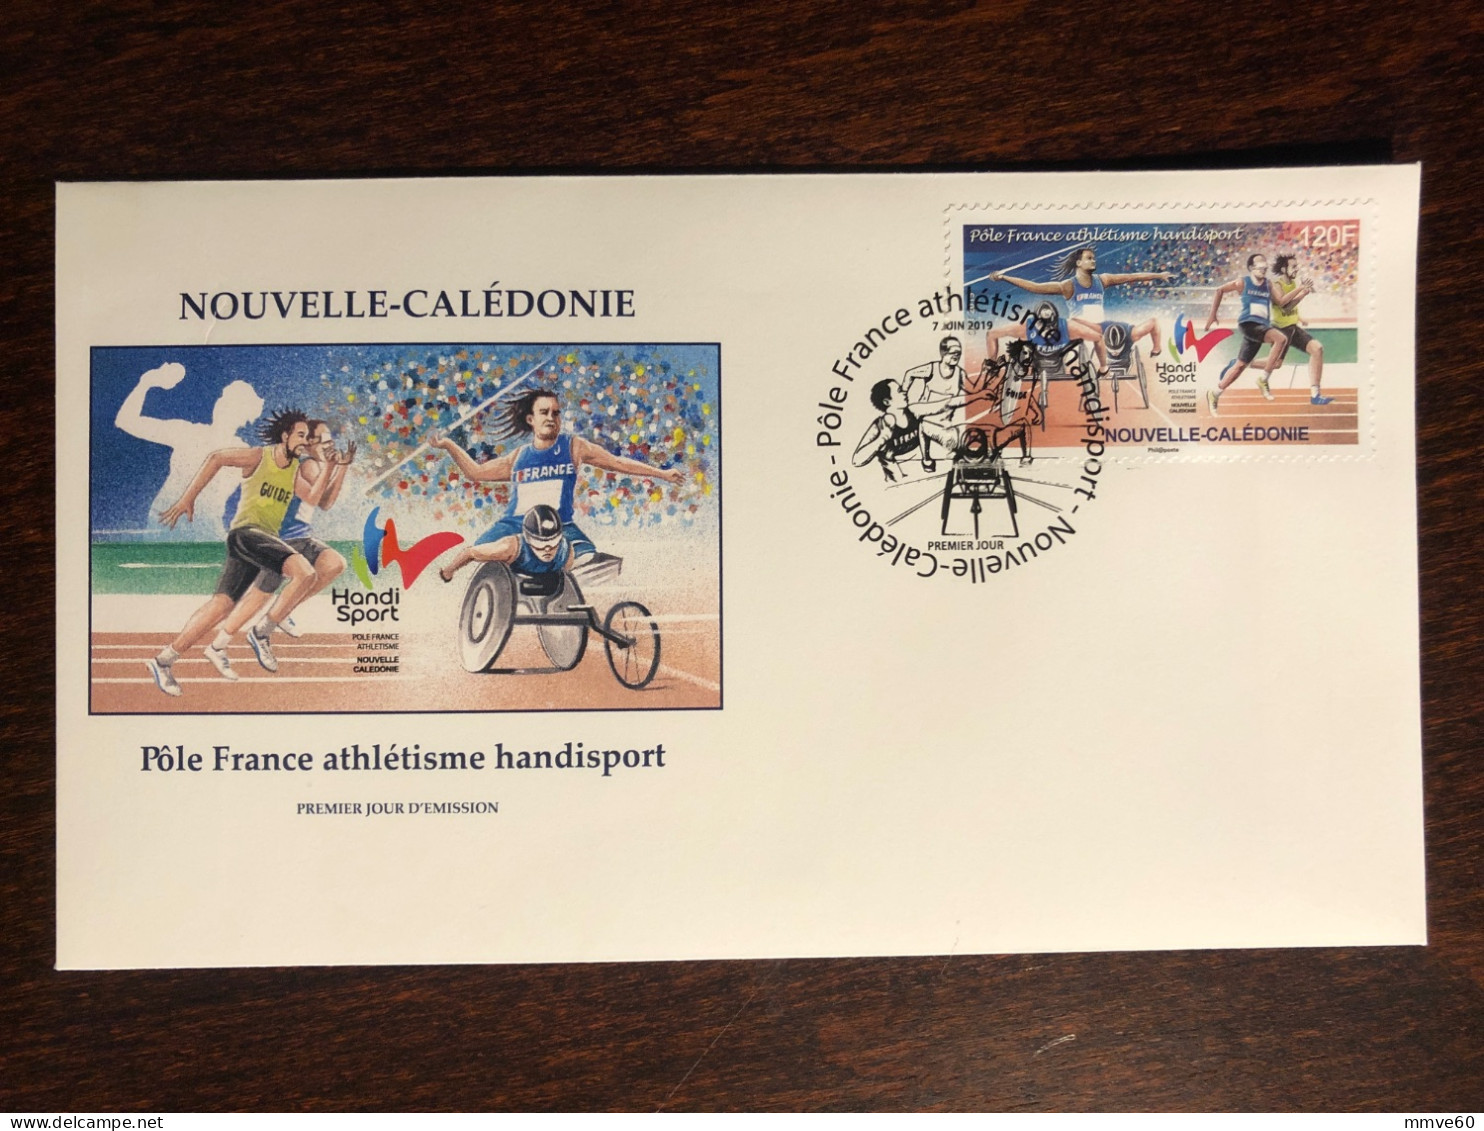 NEW CALEDONIA NOUVELLE CALEDONIE FDC COVER 2019 YEAR DISABLED IN SPORT PARALYMPICS HEALTH MEDICINE - Covers & Documents